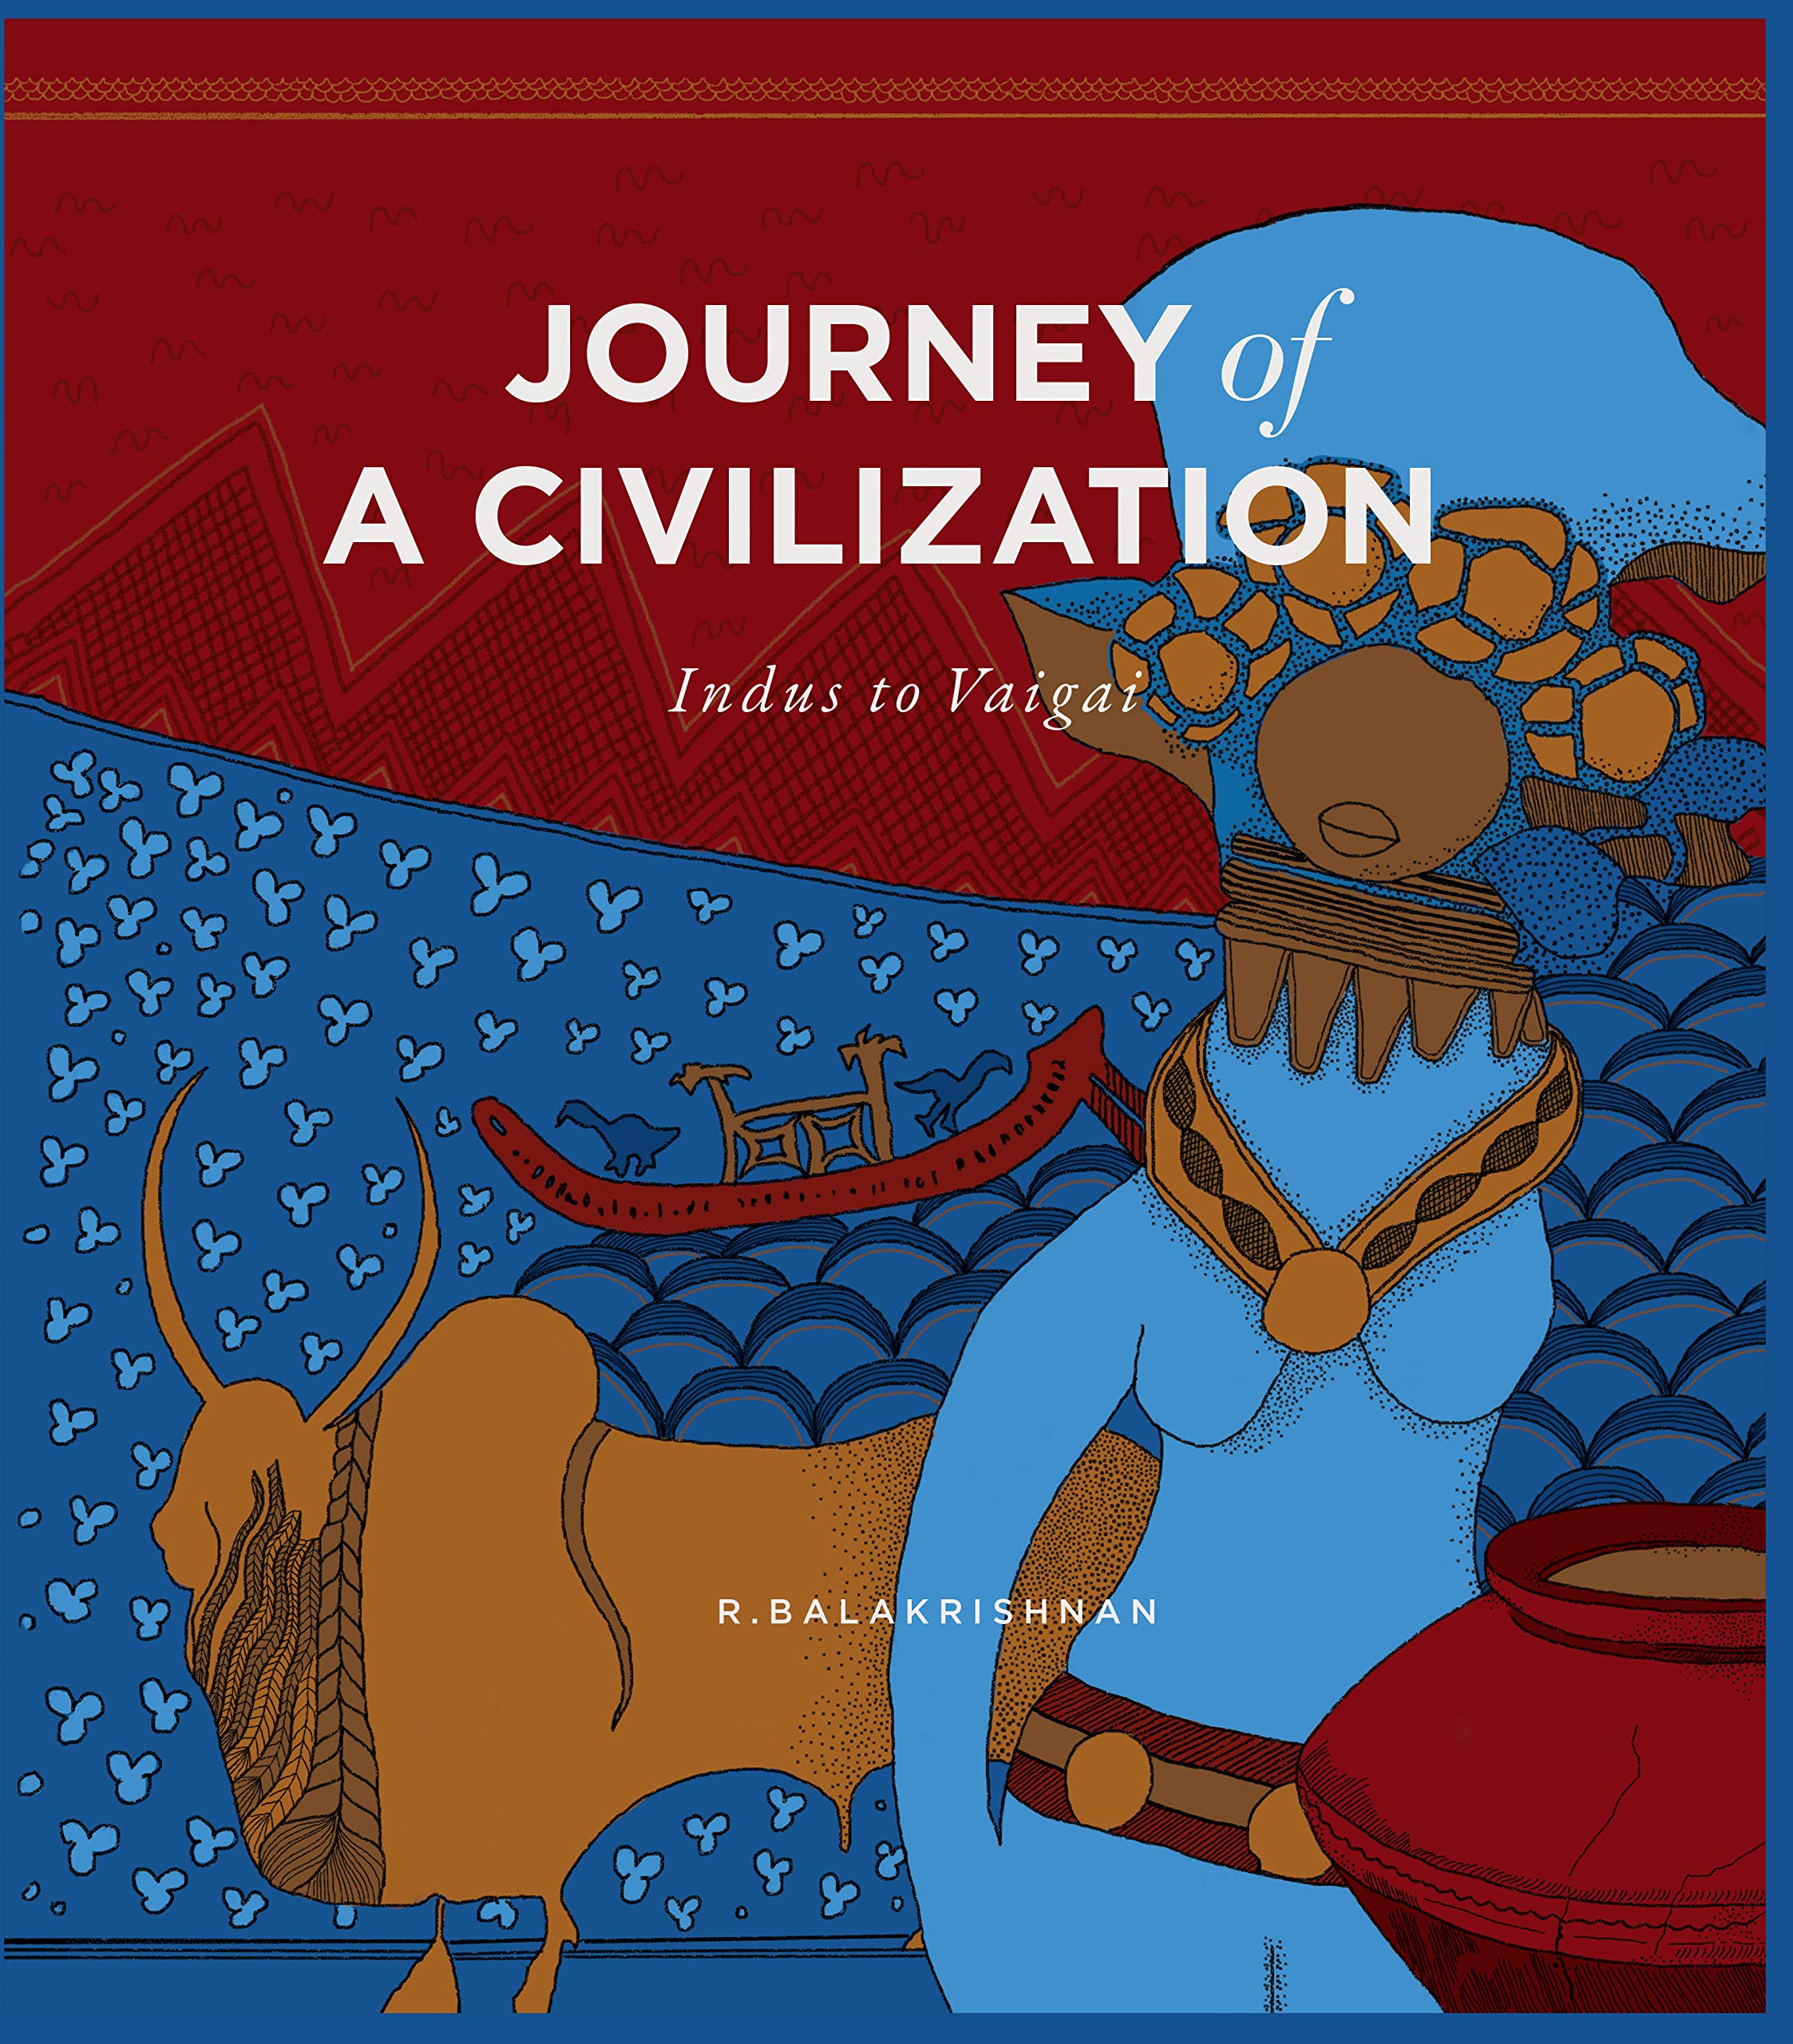 Journey of a Civilization: Decoding the Indus Valley-Sangam connect